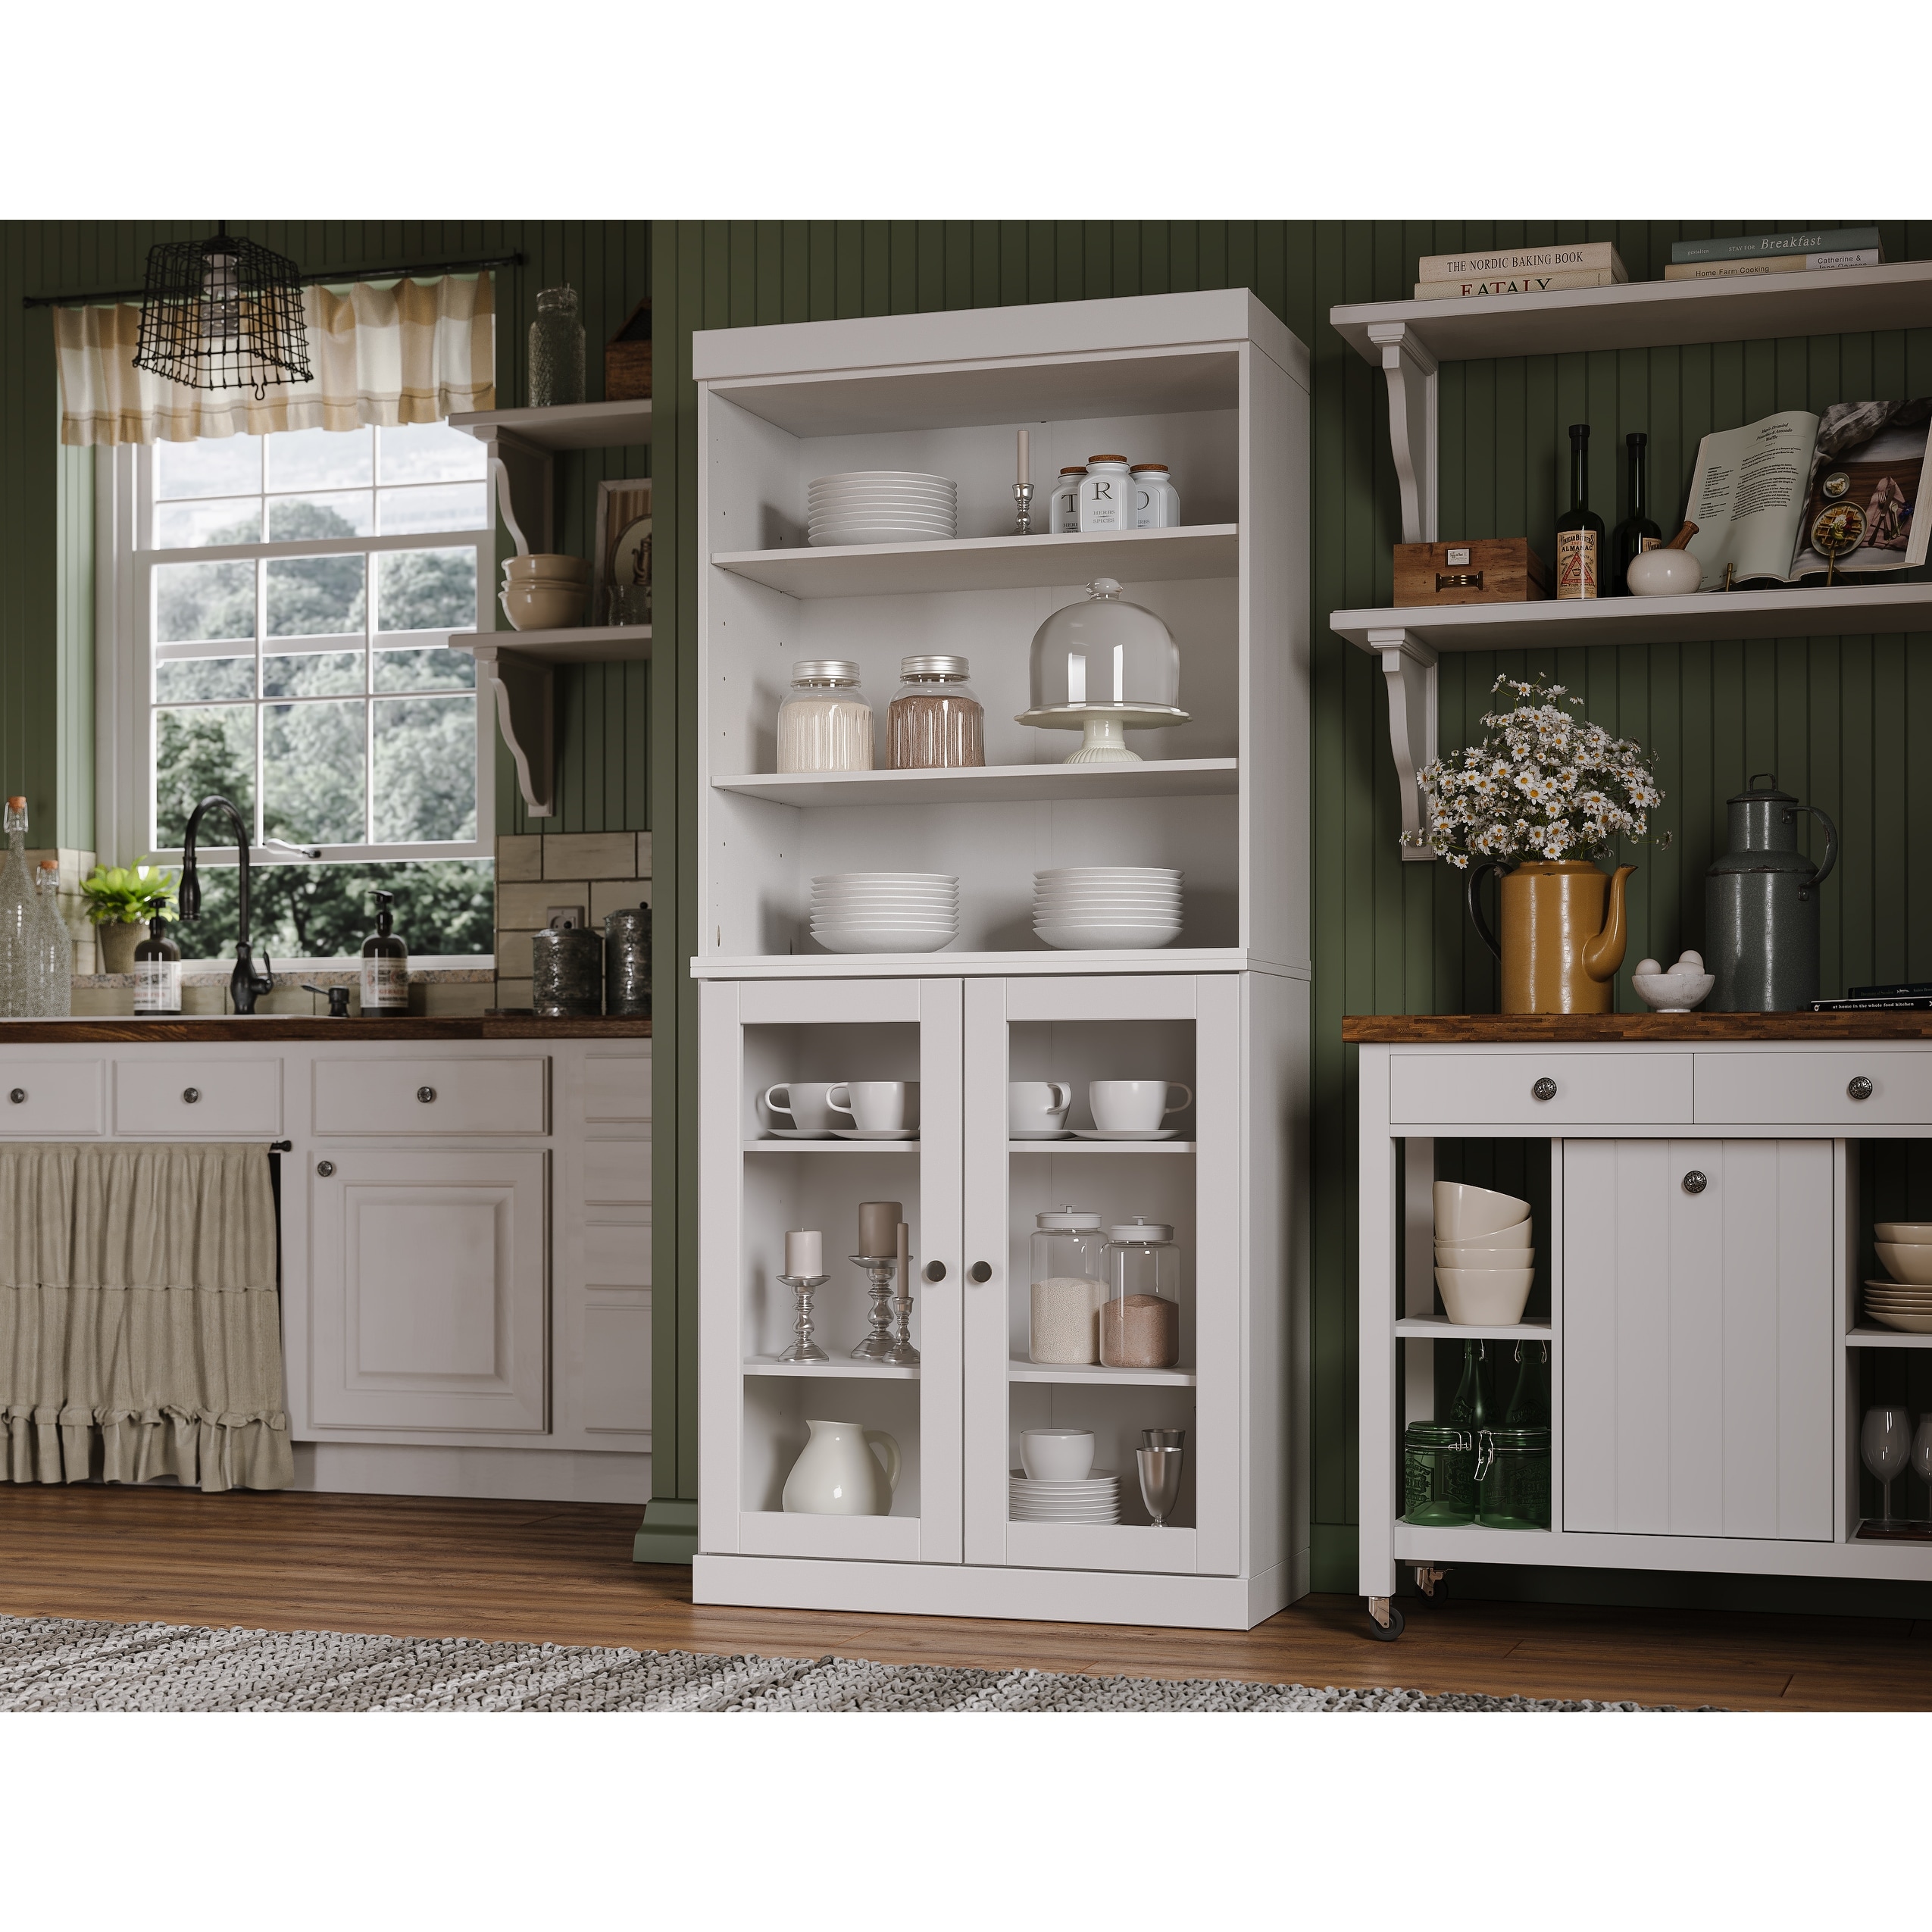 Palace Imports 100% Solid Wood Pantry with Solid Wood or Glass Doors - 32"w x 71.5"h